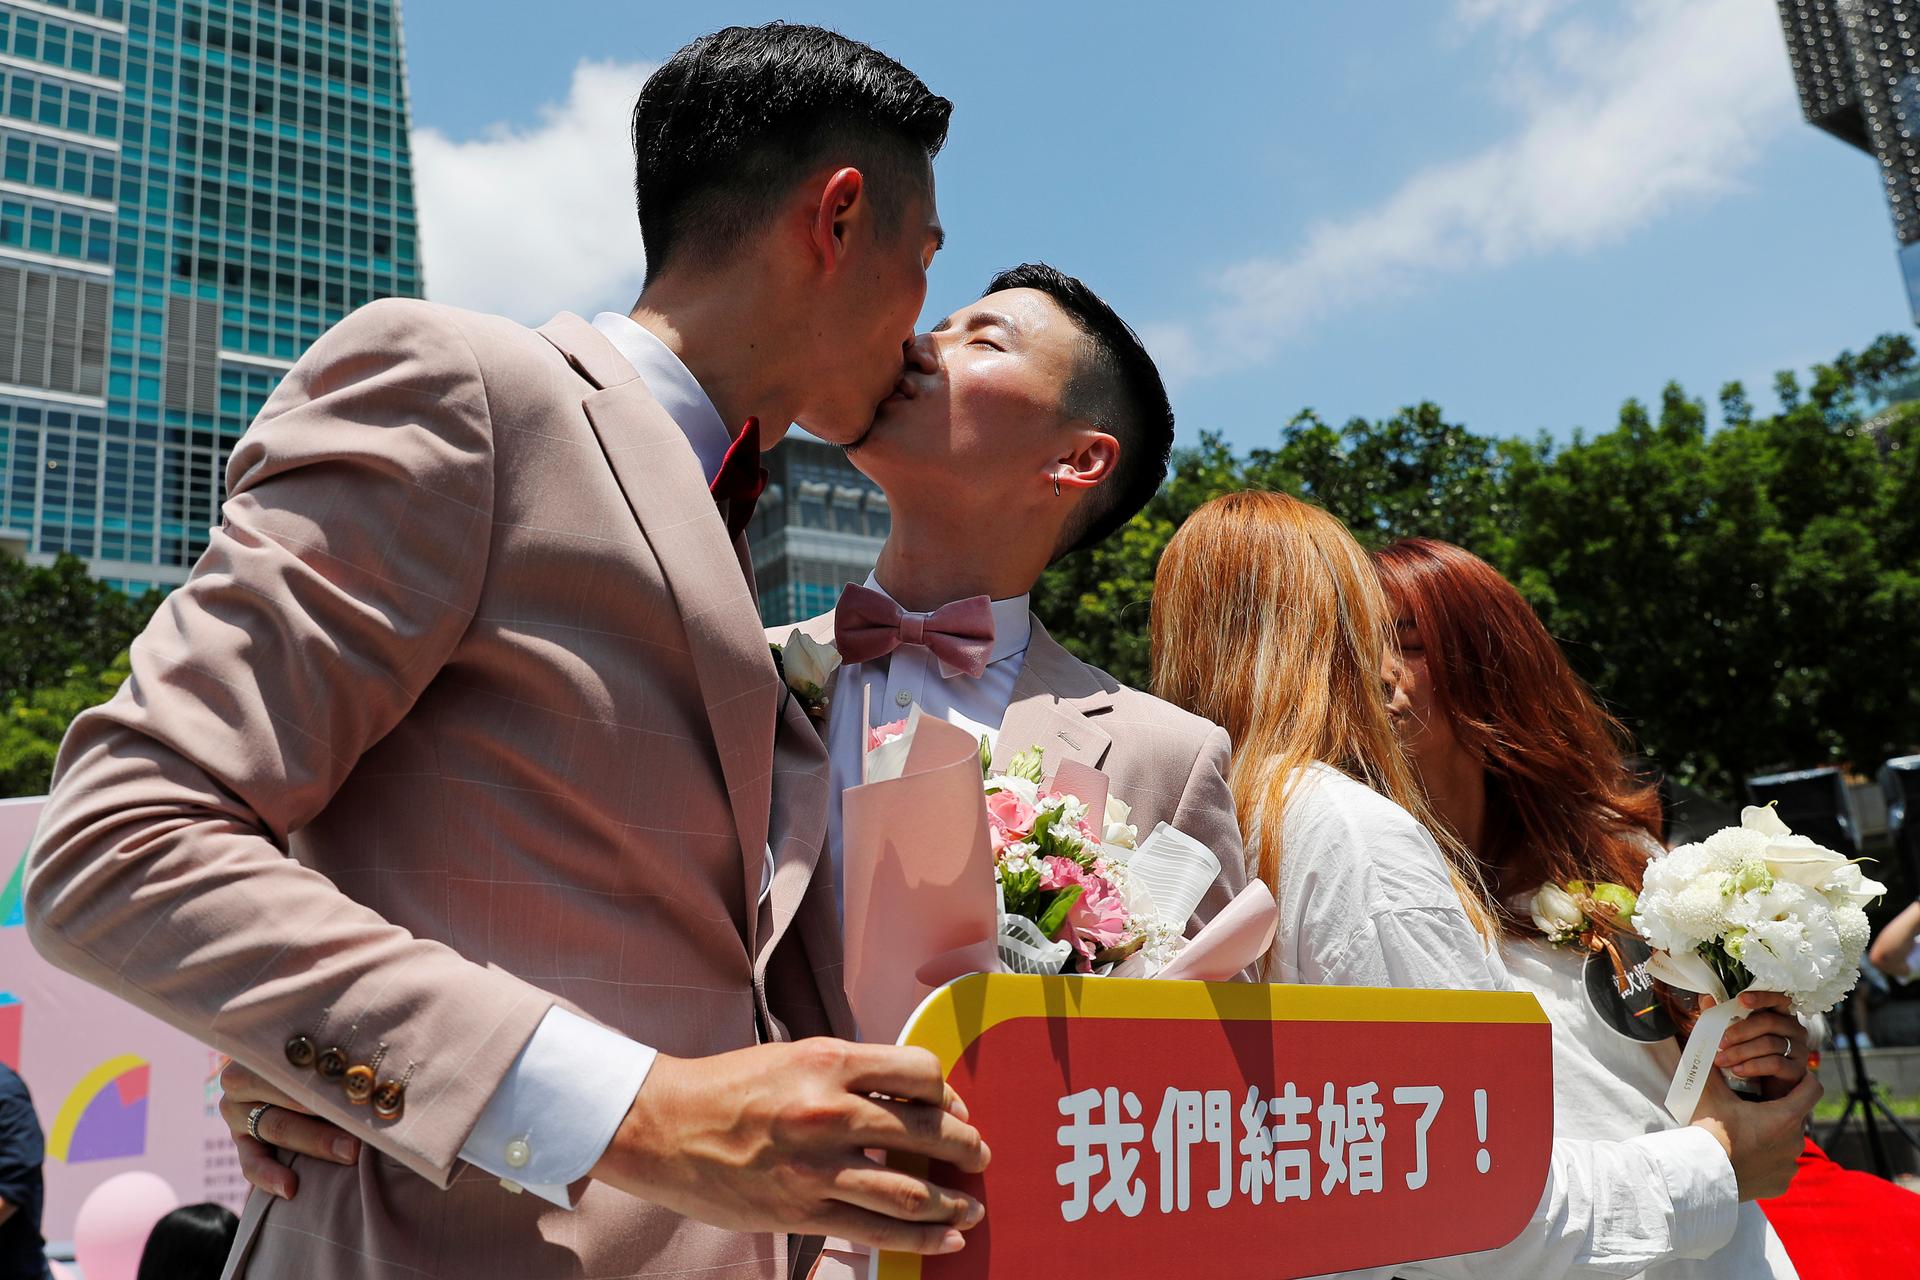 Gay and lesbian newlyweds kiss at a pro same-sex marriage party in Taipei.